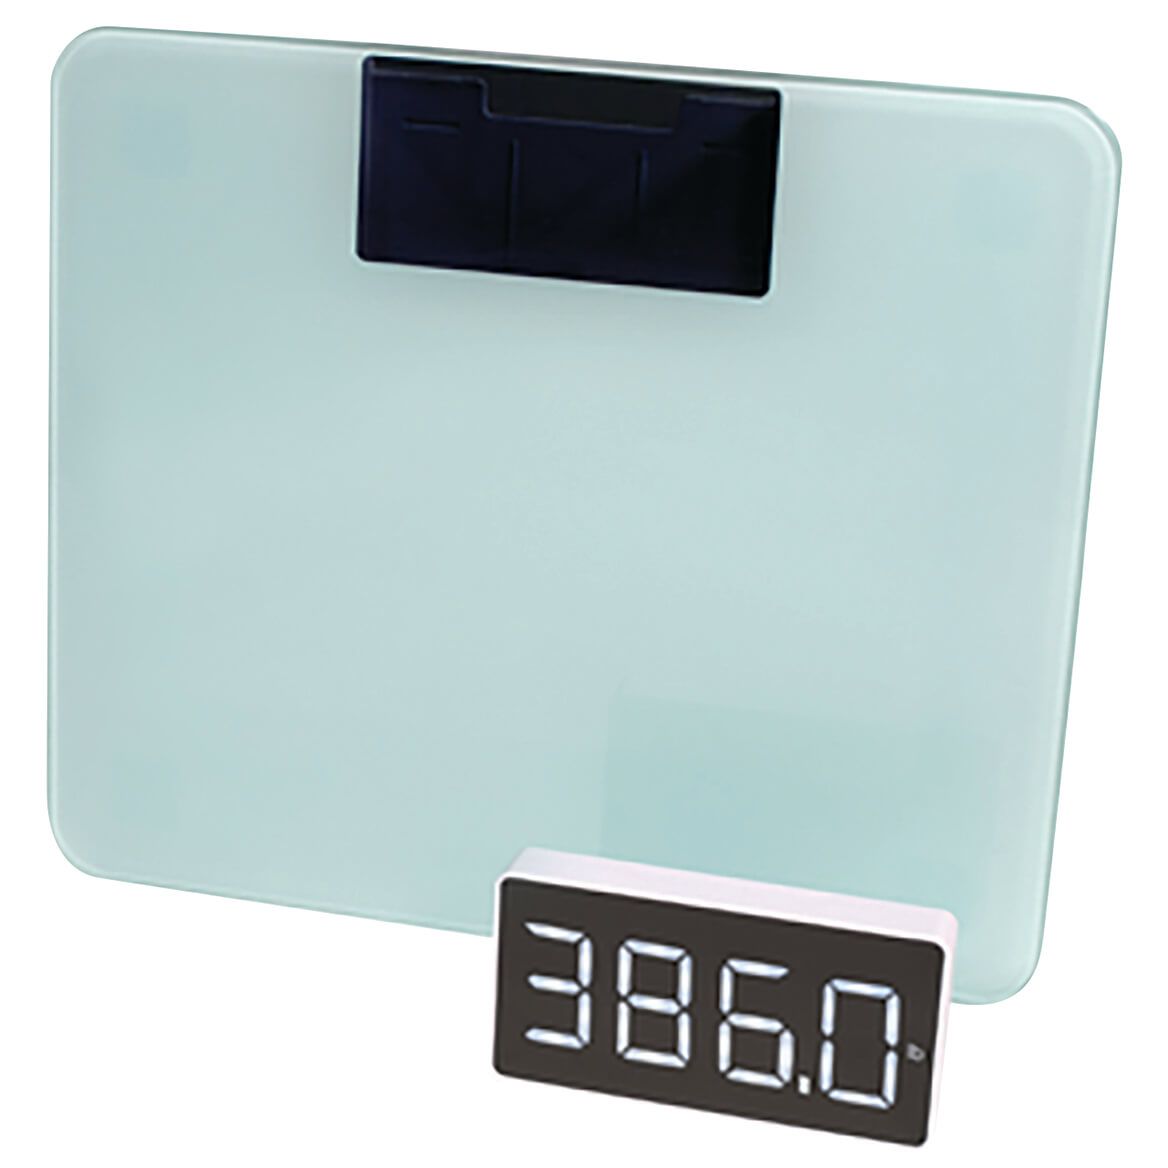 Clear View Wireless Display Scale + '-' + 376539